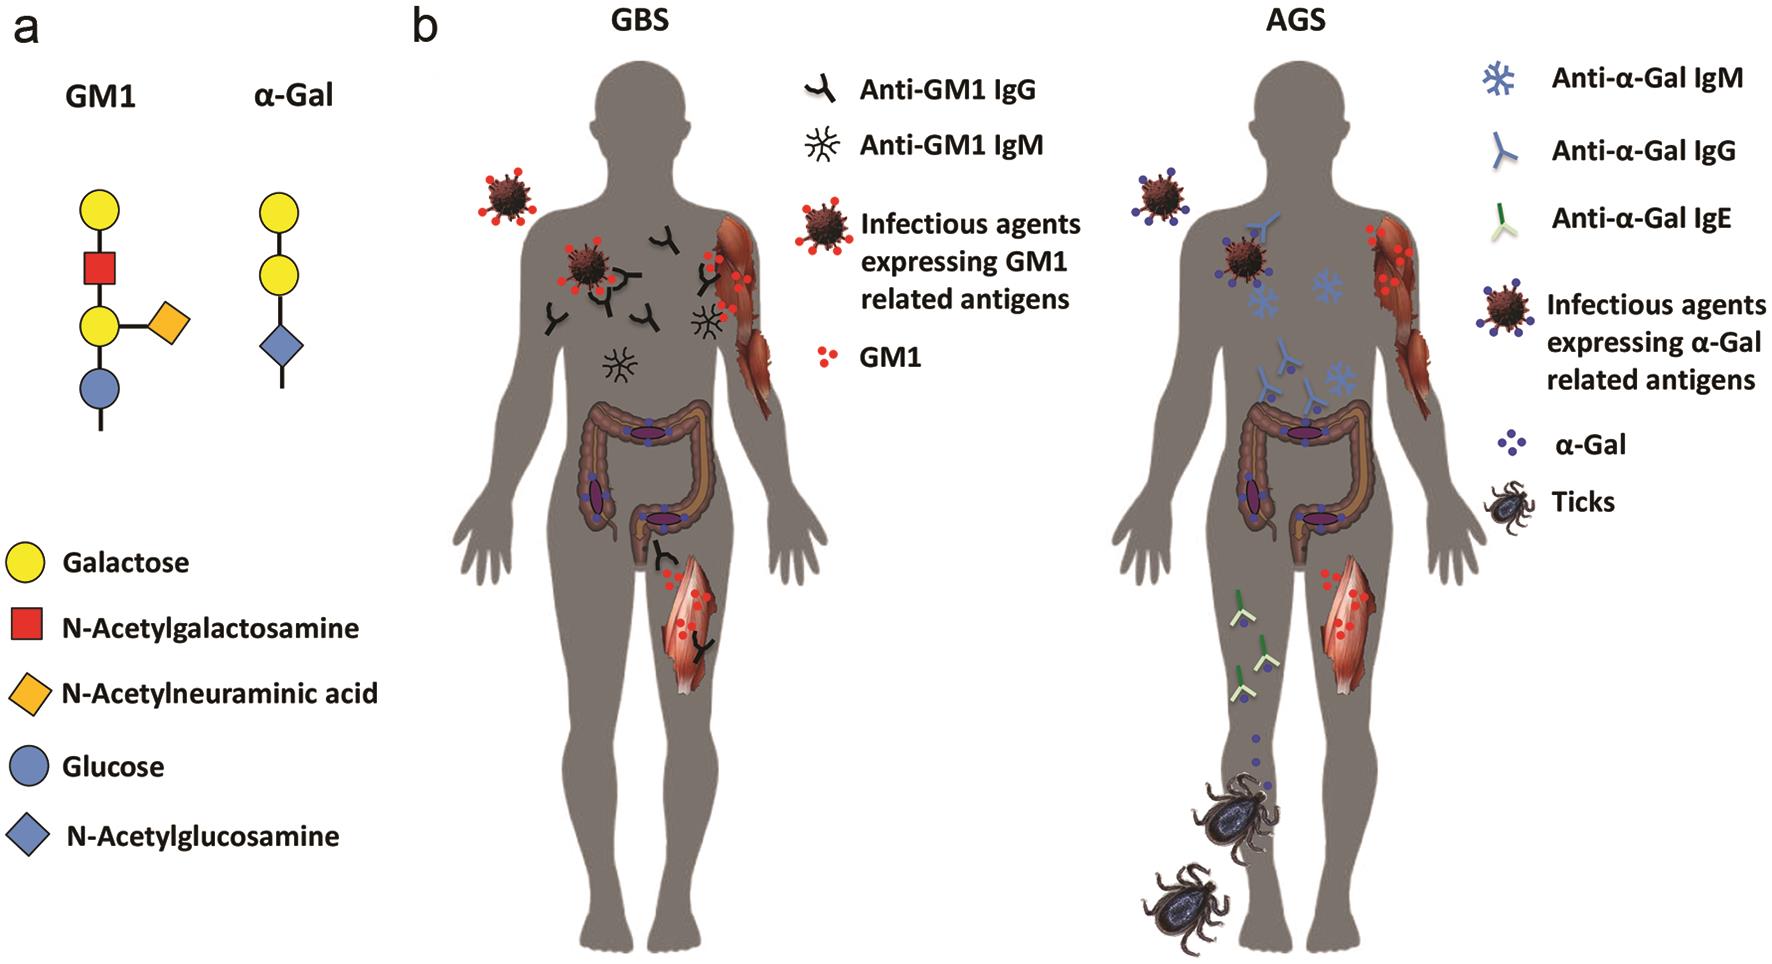 Immunological similarities between GBS and AGS.